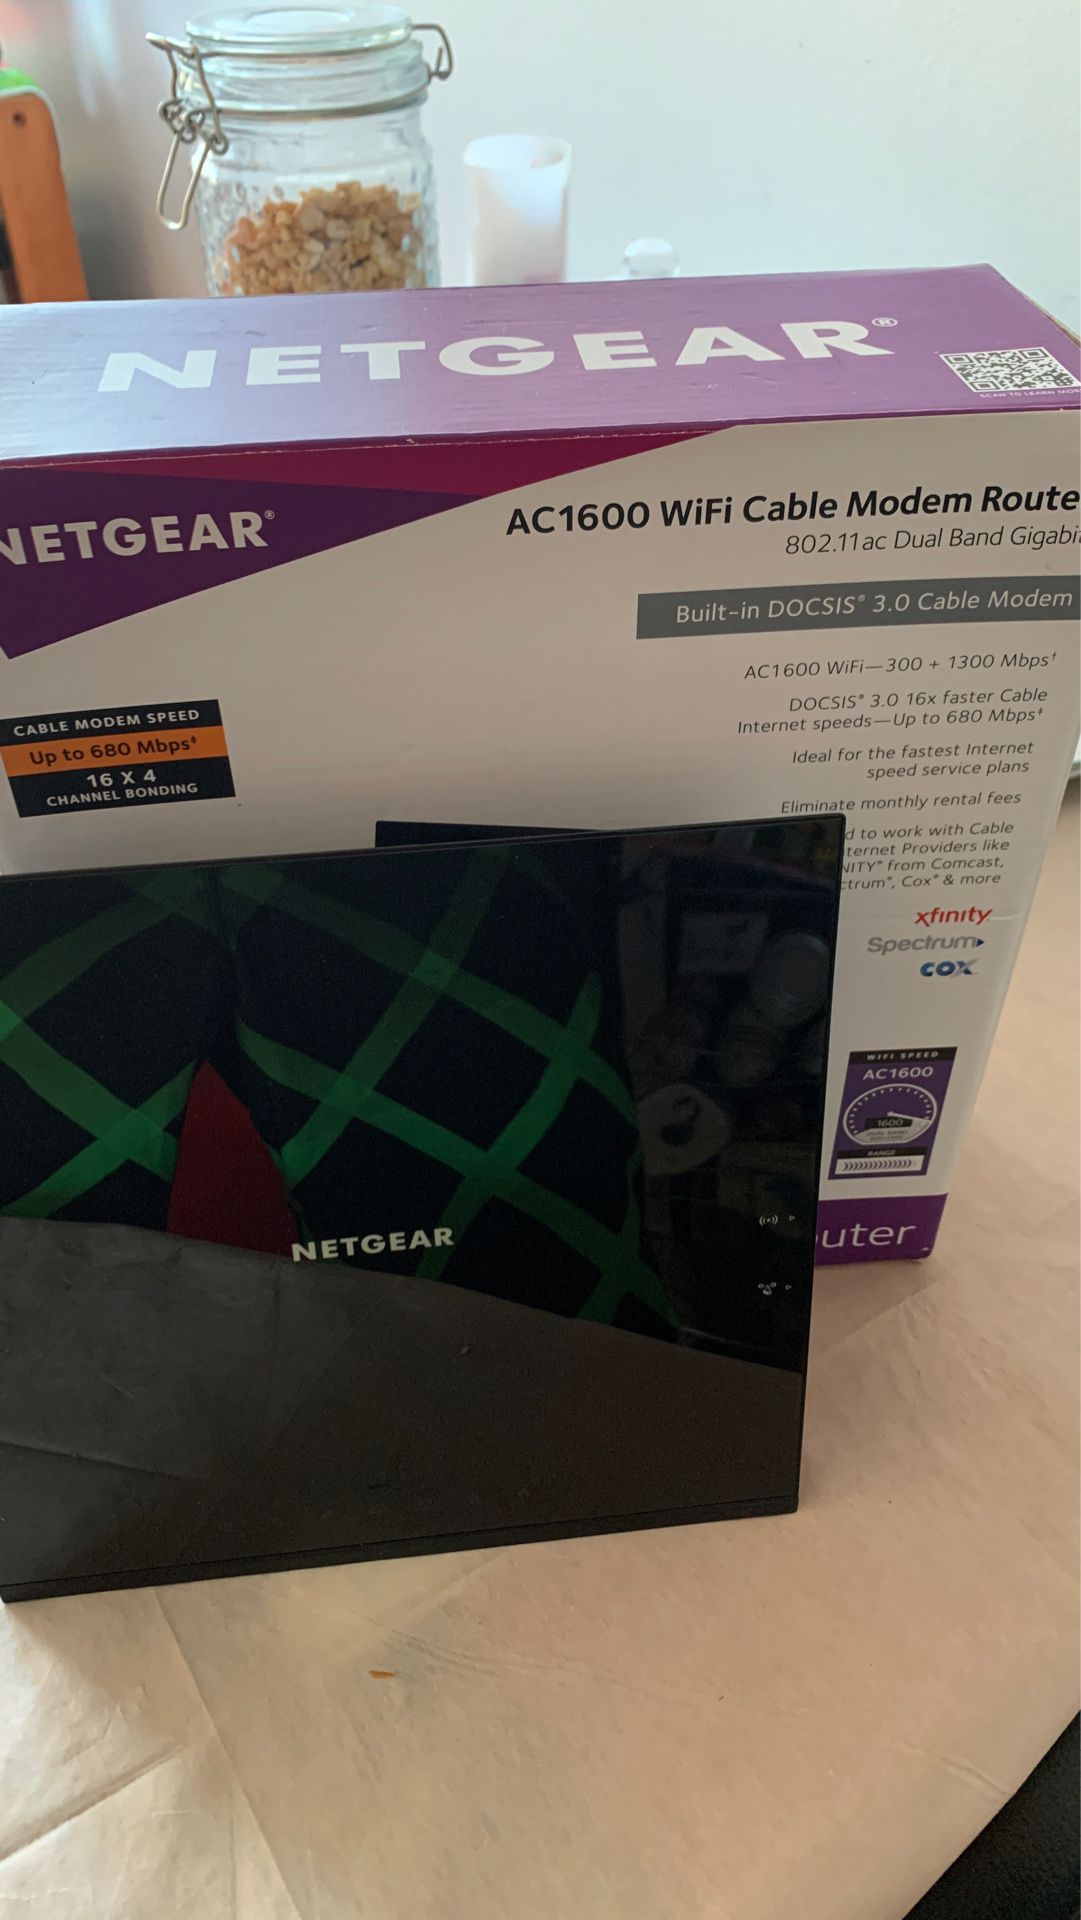 WiFi cable modem Router